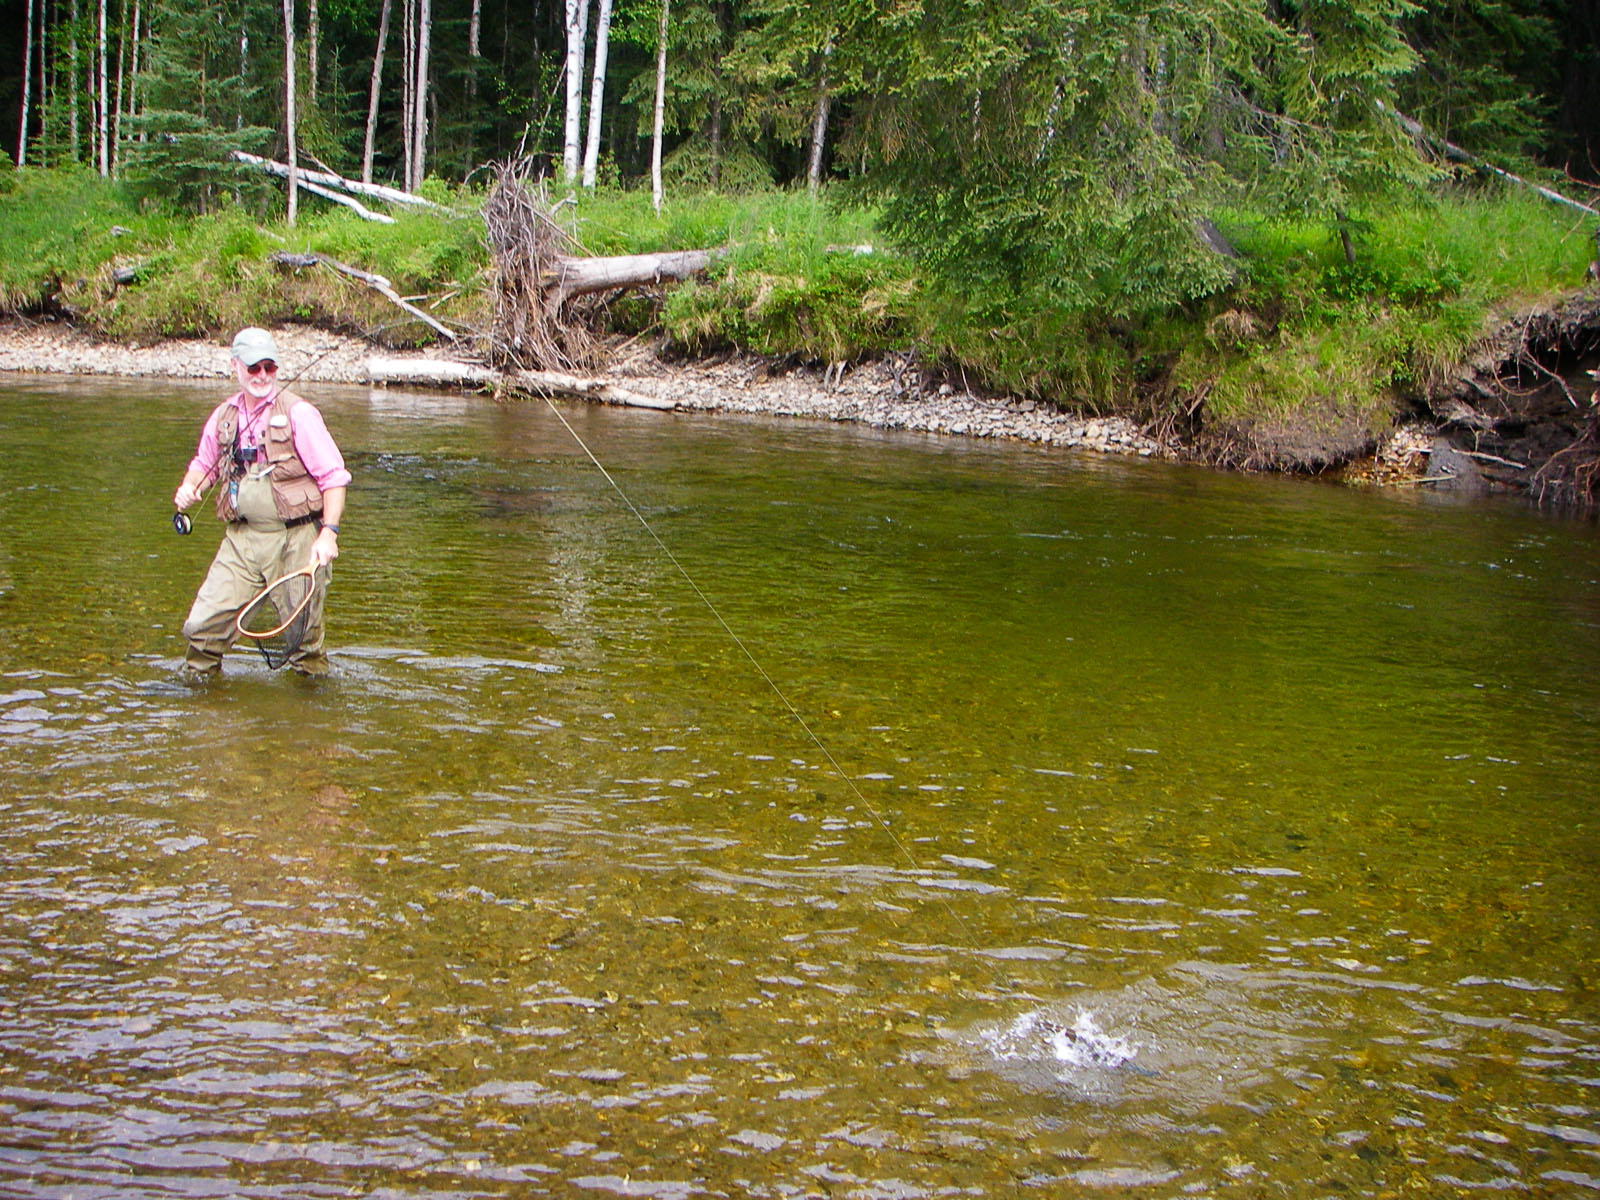 My dad fighting a grayling. From the Chena River in Alaska.